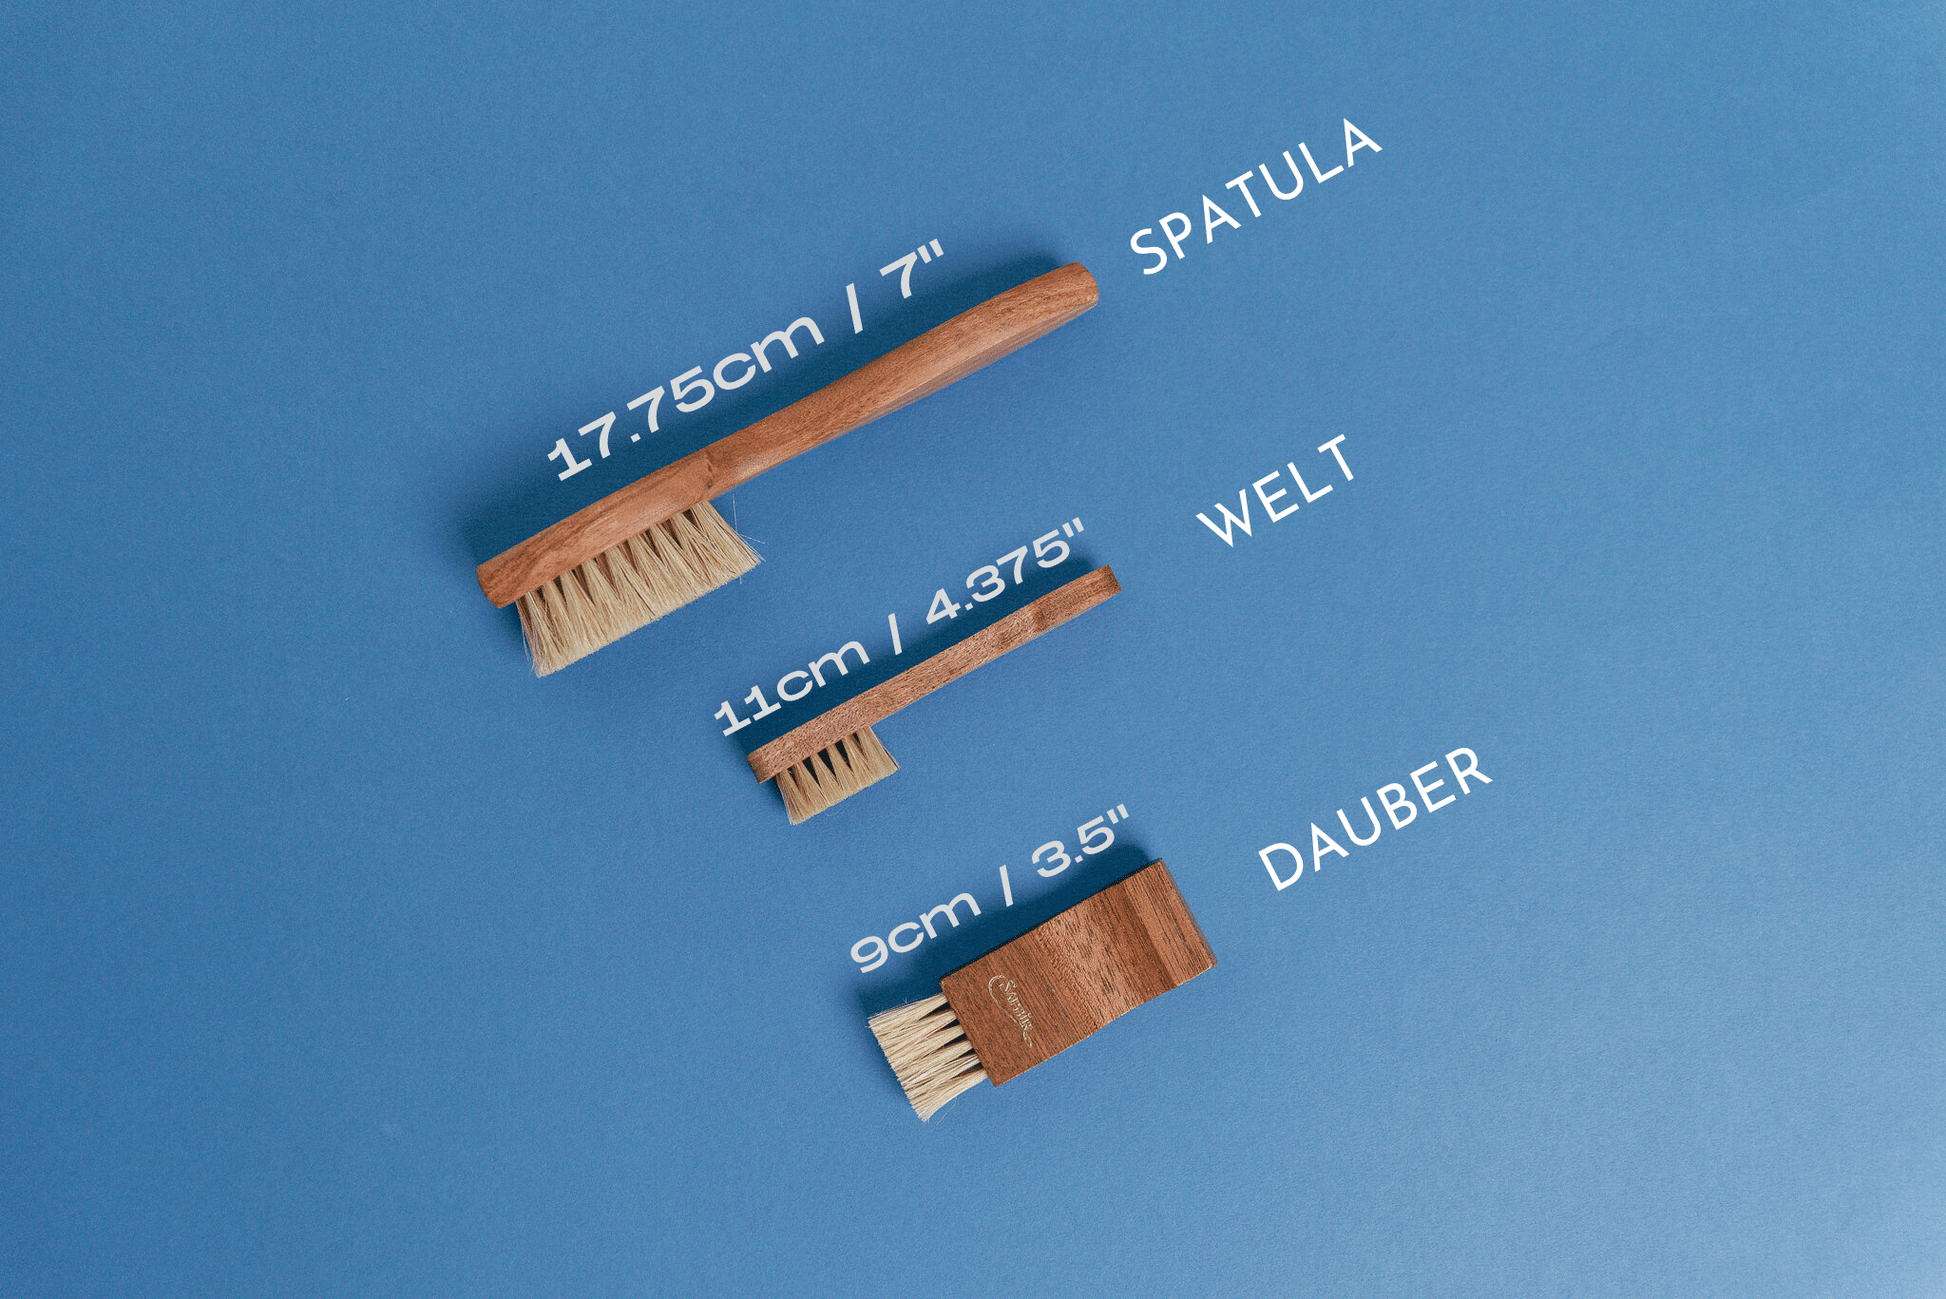 Saphir Medaille d'or Brush size comparison chart showing a small applicator dauber brush, a small welt mini spatula brush, large spatula brush all in natural